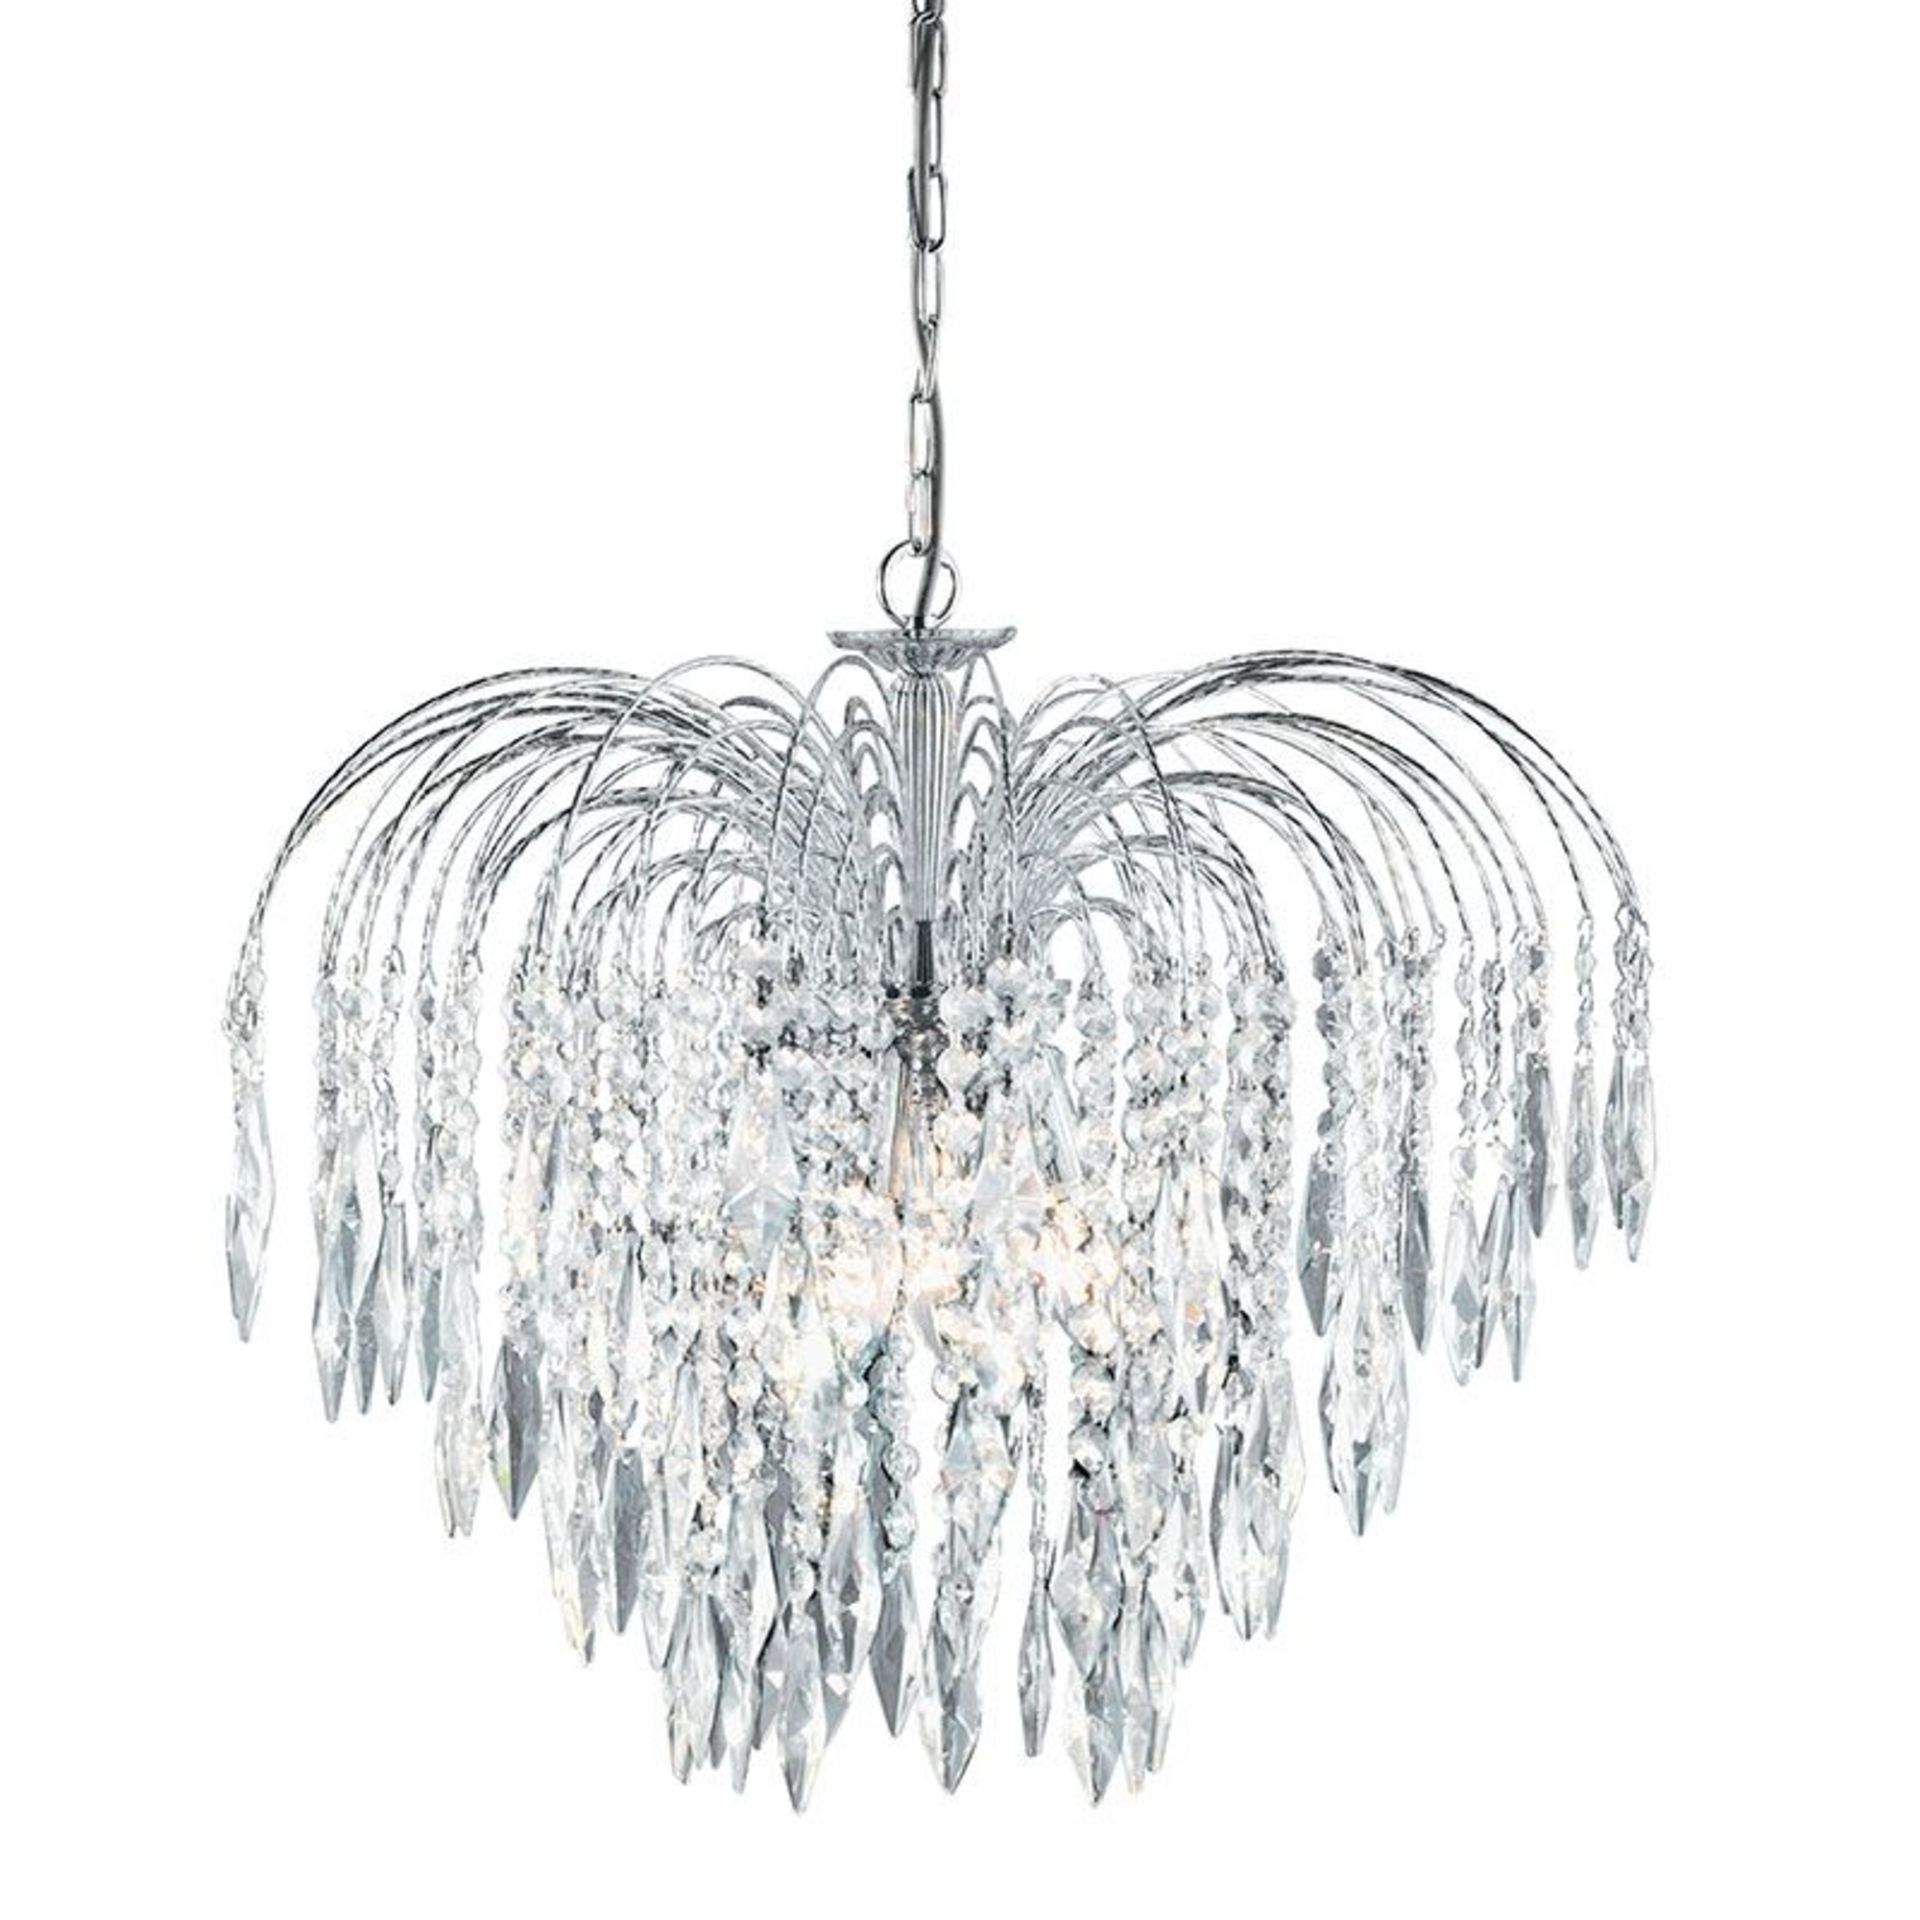 1 x Searchlight Waterfall 5 Light Chandelier in Chrome - Ex Display Stock - CL298 - Product Code